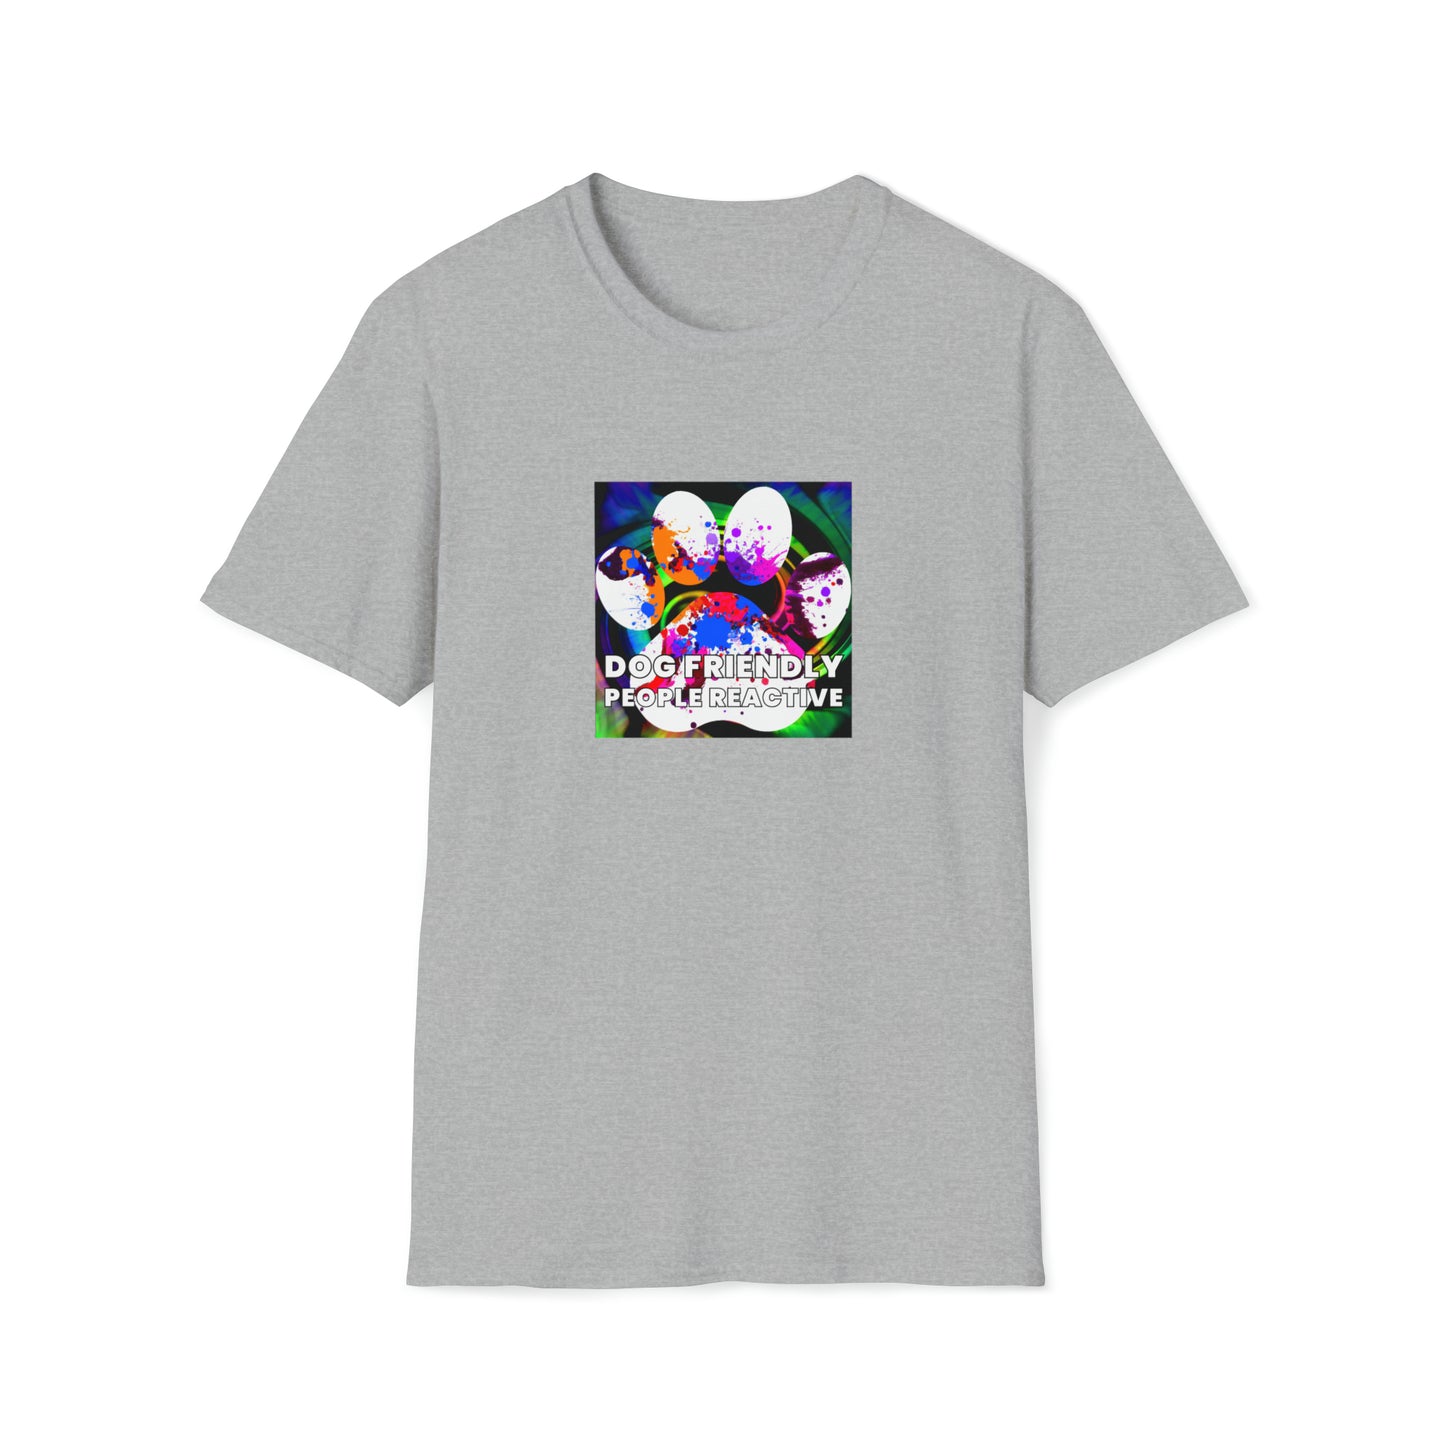 90s Street Apparel by Antoine - "Dog Friendly, People Reactive" (colored swirl) Unisex Tee